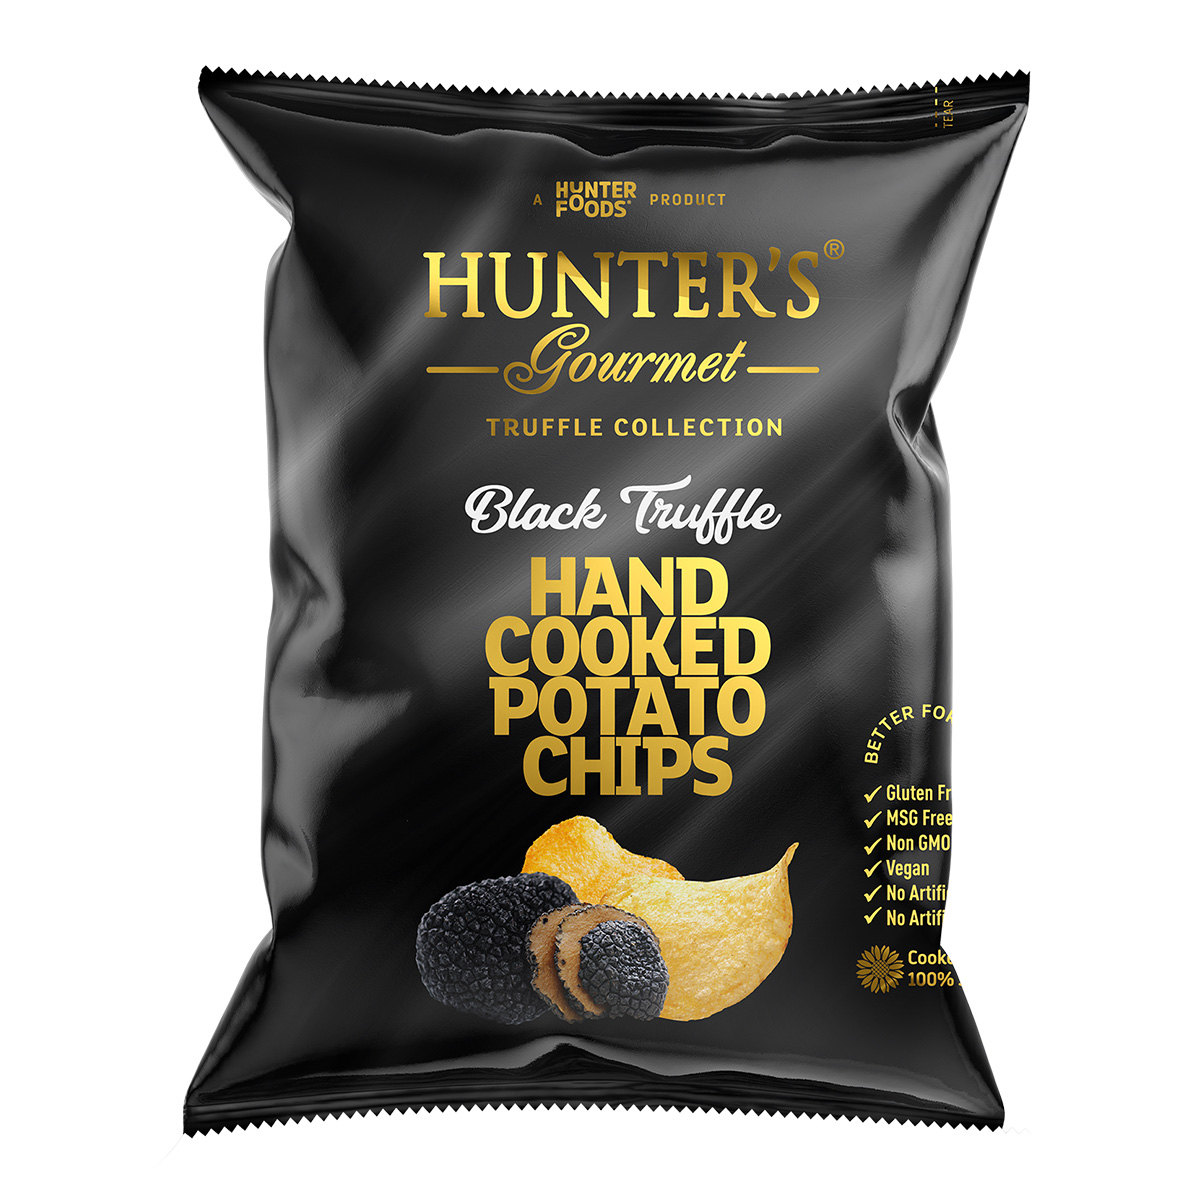 Hunter’s Gourmet Hand Cooked Potato Chips – Black Truffle and Parmesan – Truffle Collection (25gm)